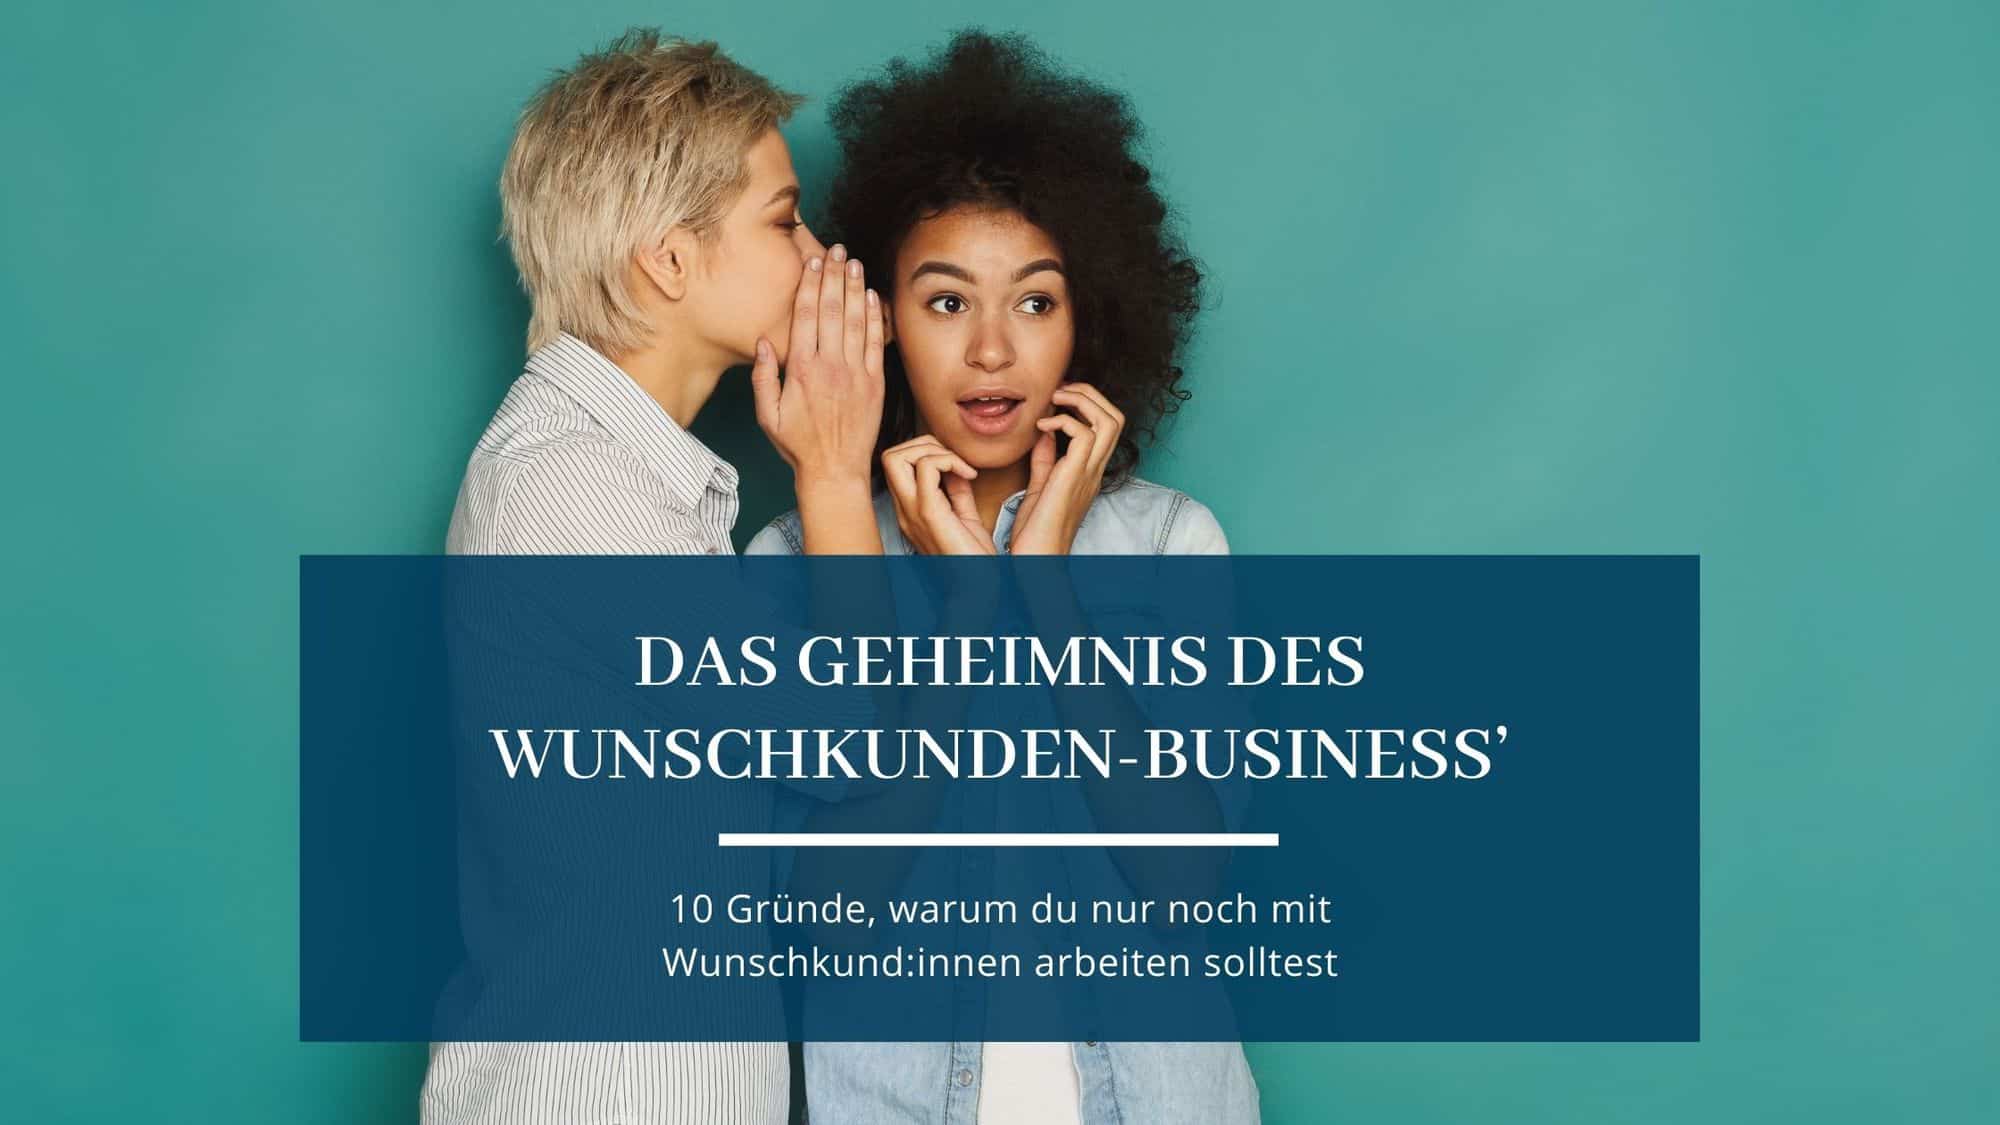 You are currently viewing Das Geheimnis des Wunschkunden-Business’